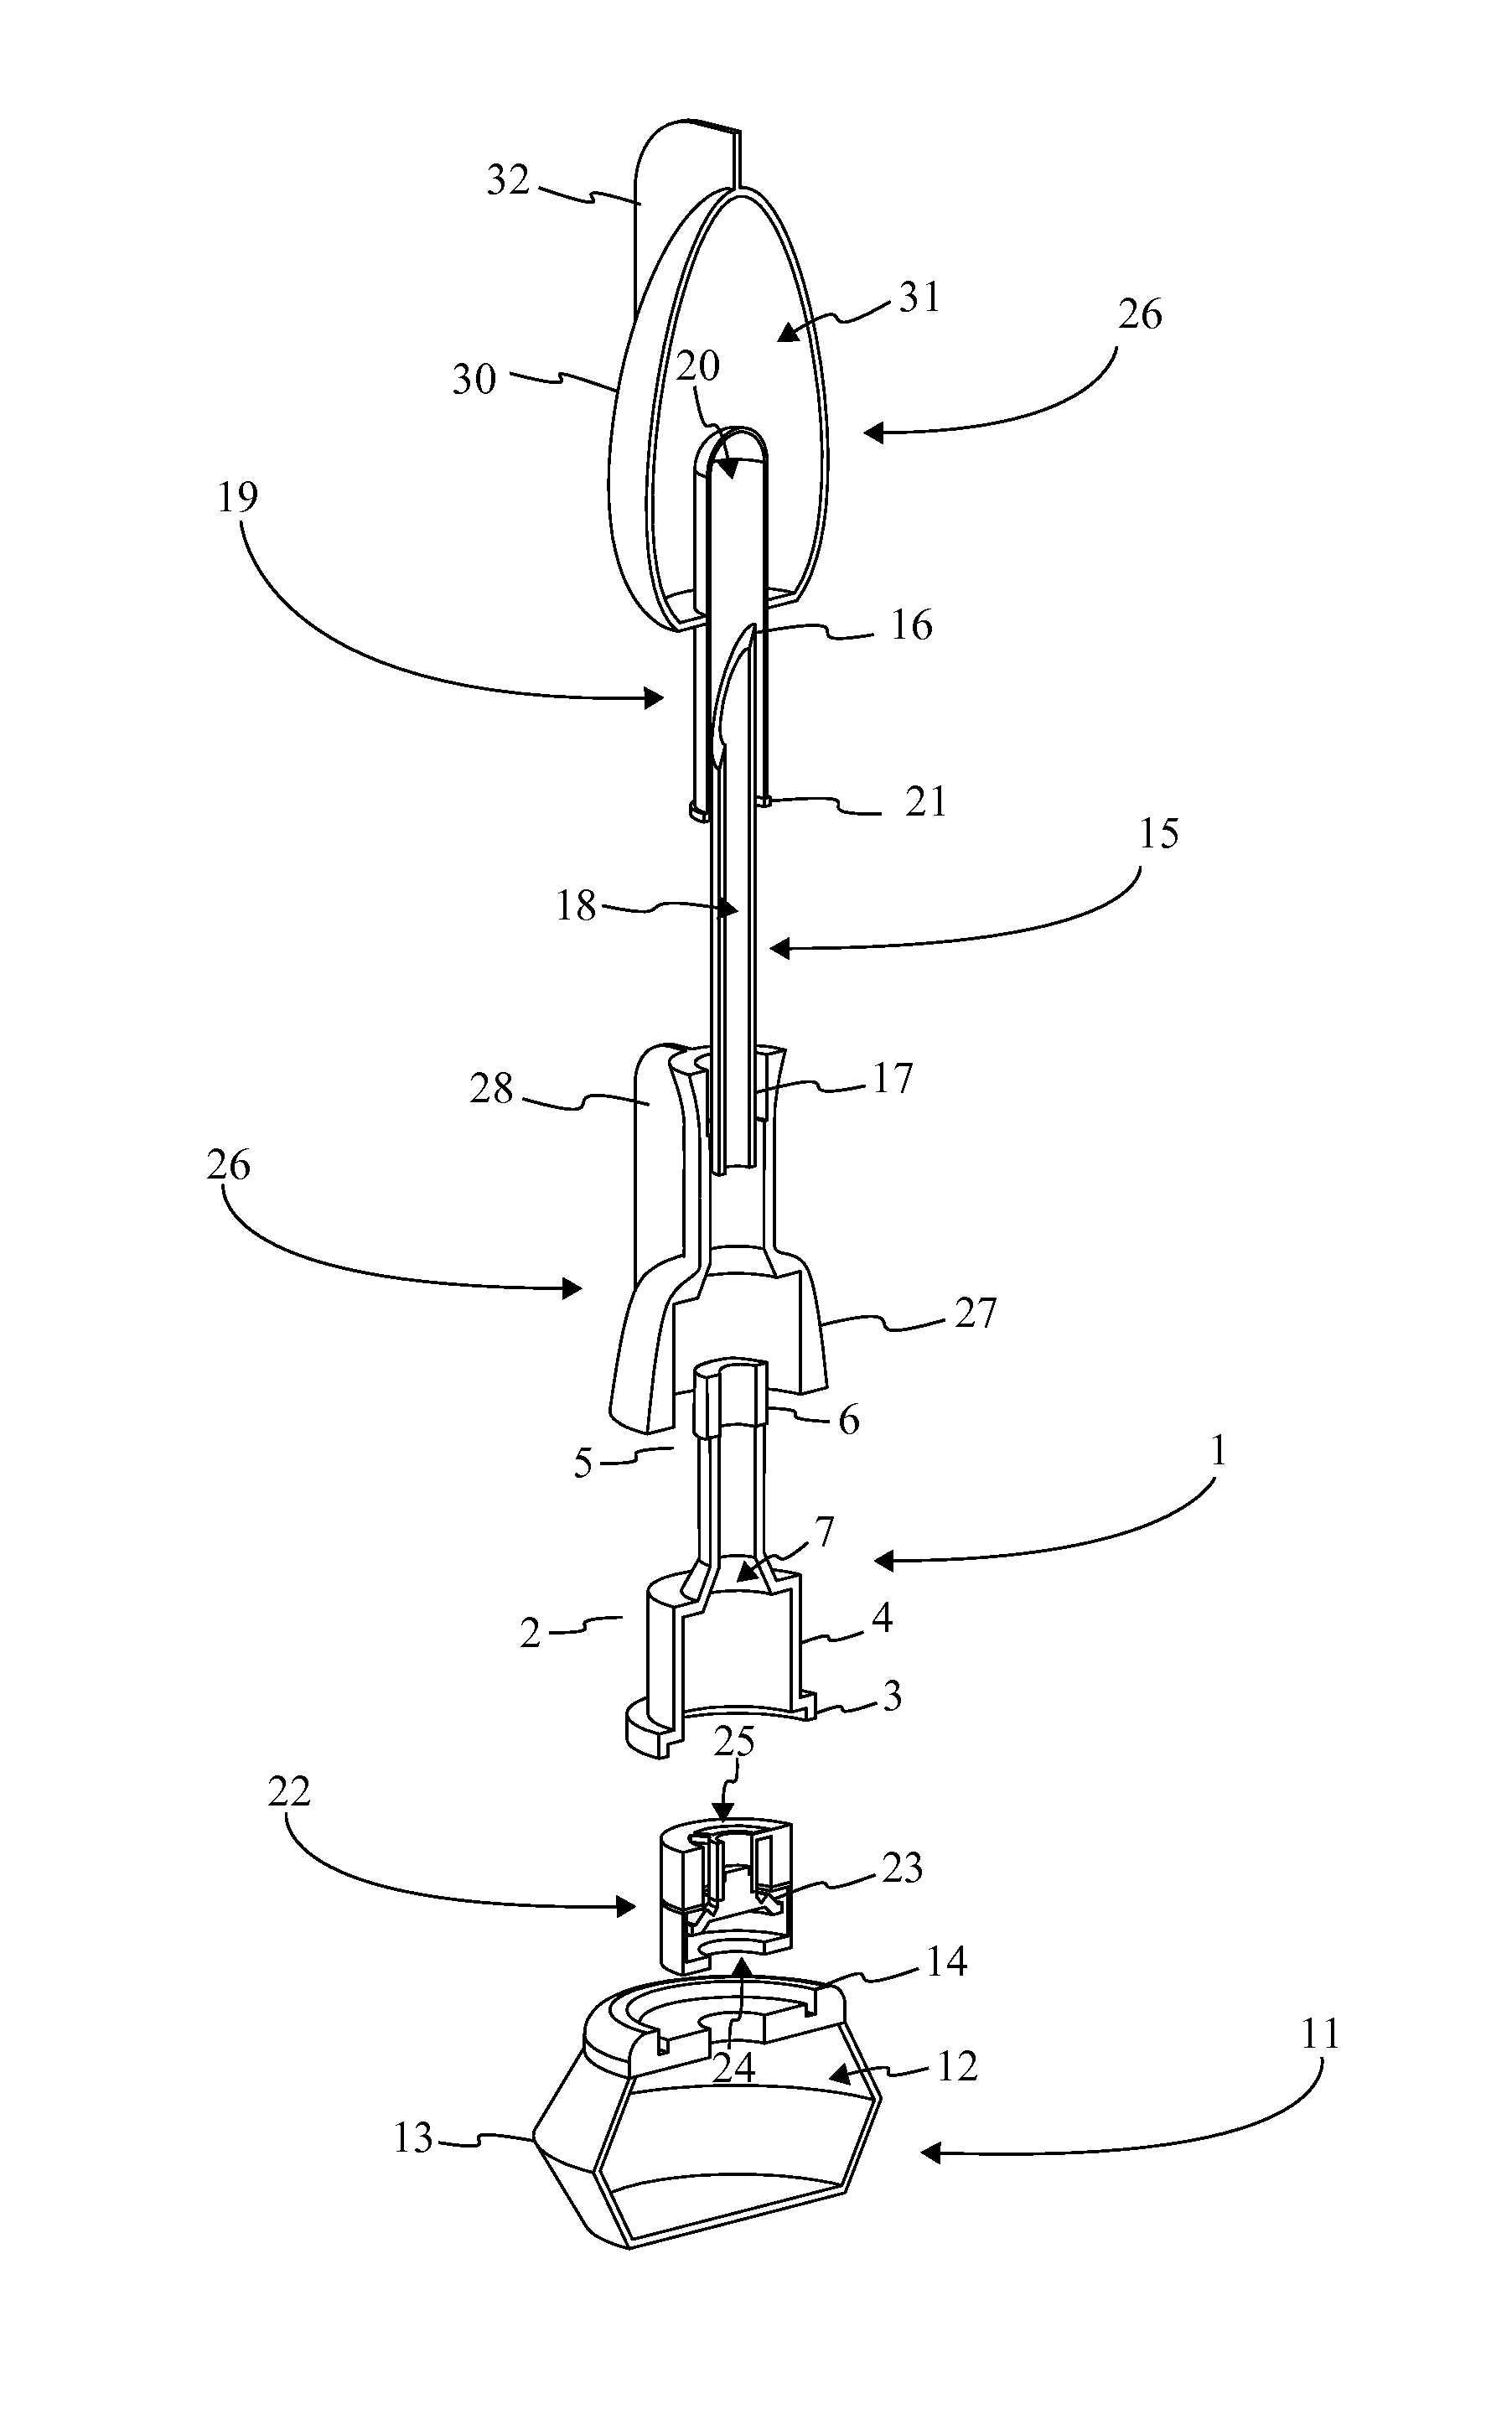 Prefilled Medical Injection Device